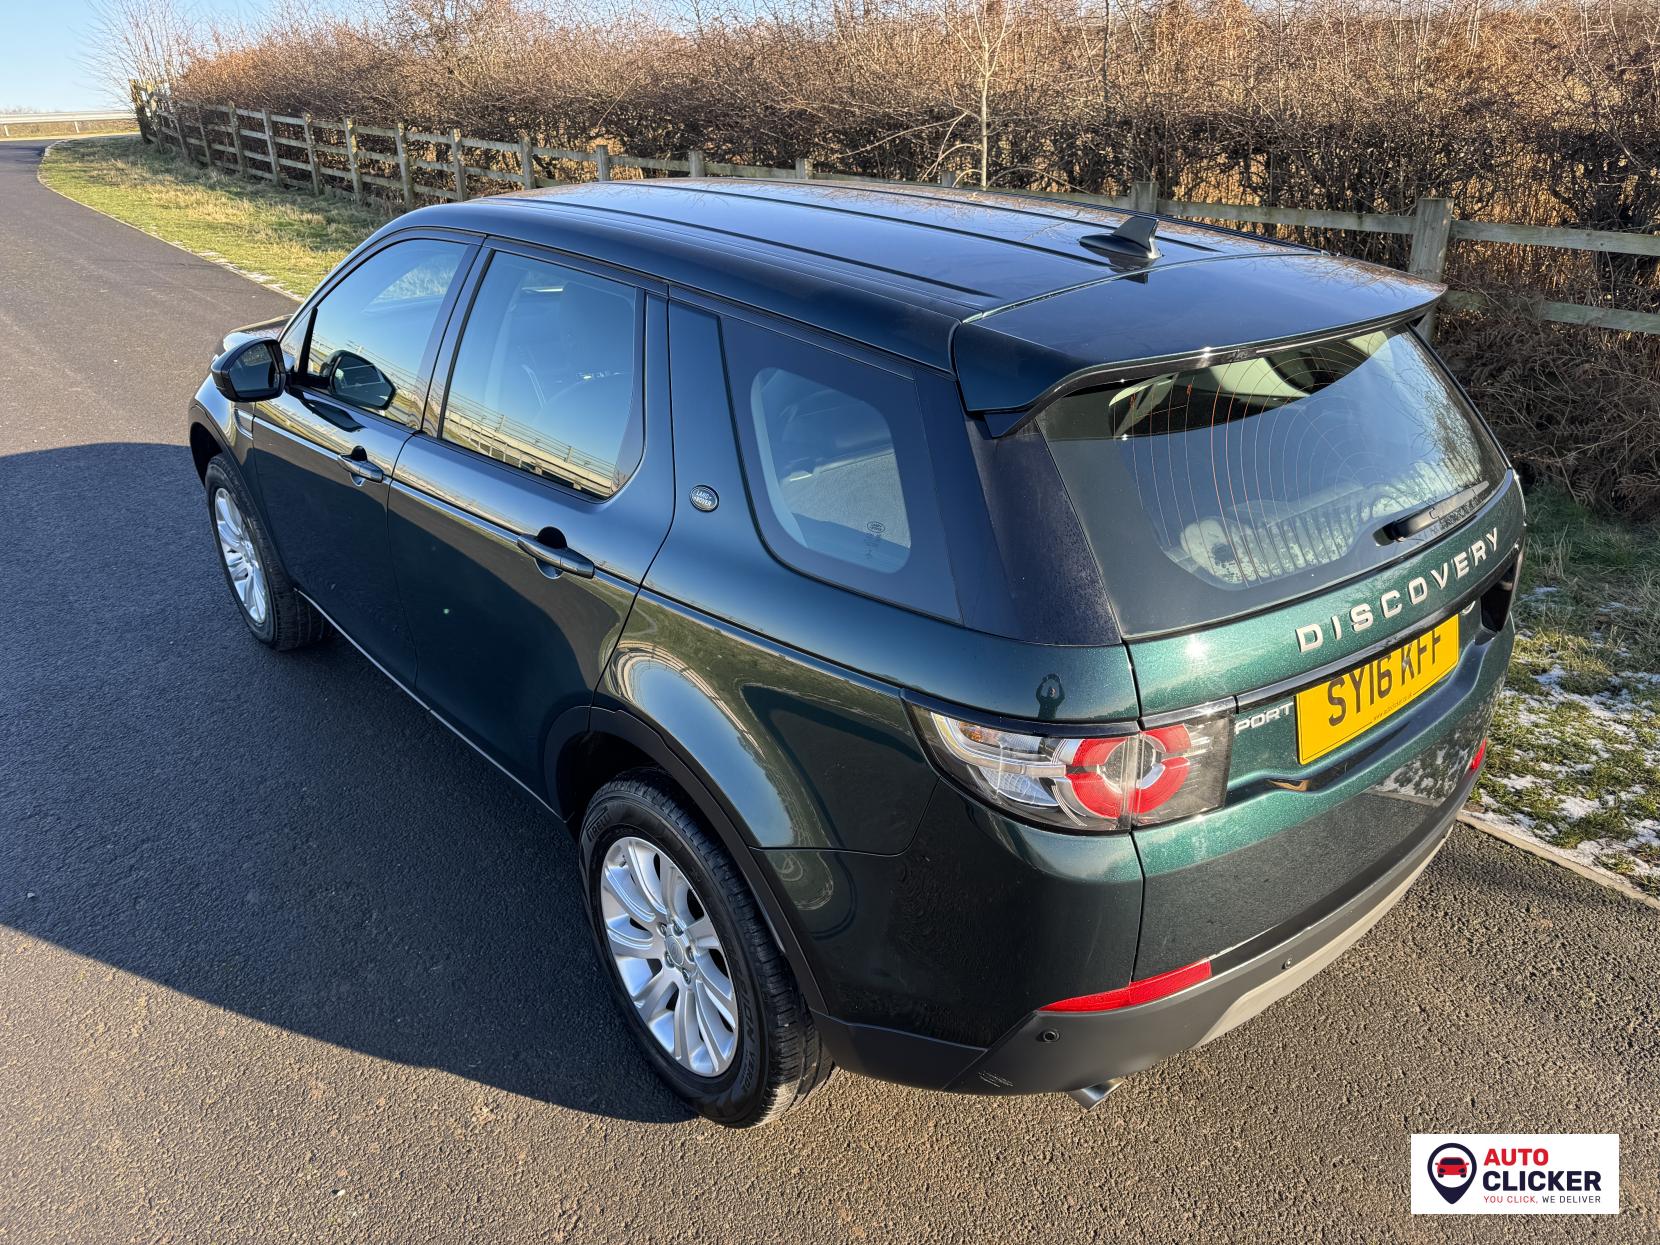 Land Rover Discovery Sport 2.0 TD4 SE SUV 5dr Diesel Auto 4WD Euro 6 (s/s) (180 ps)